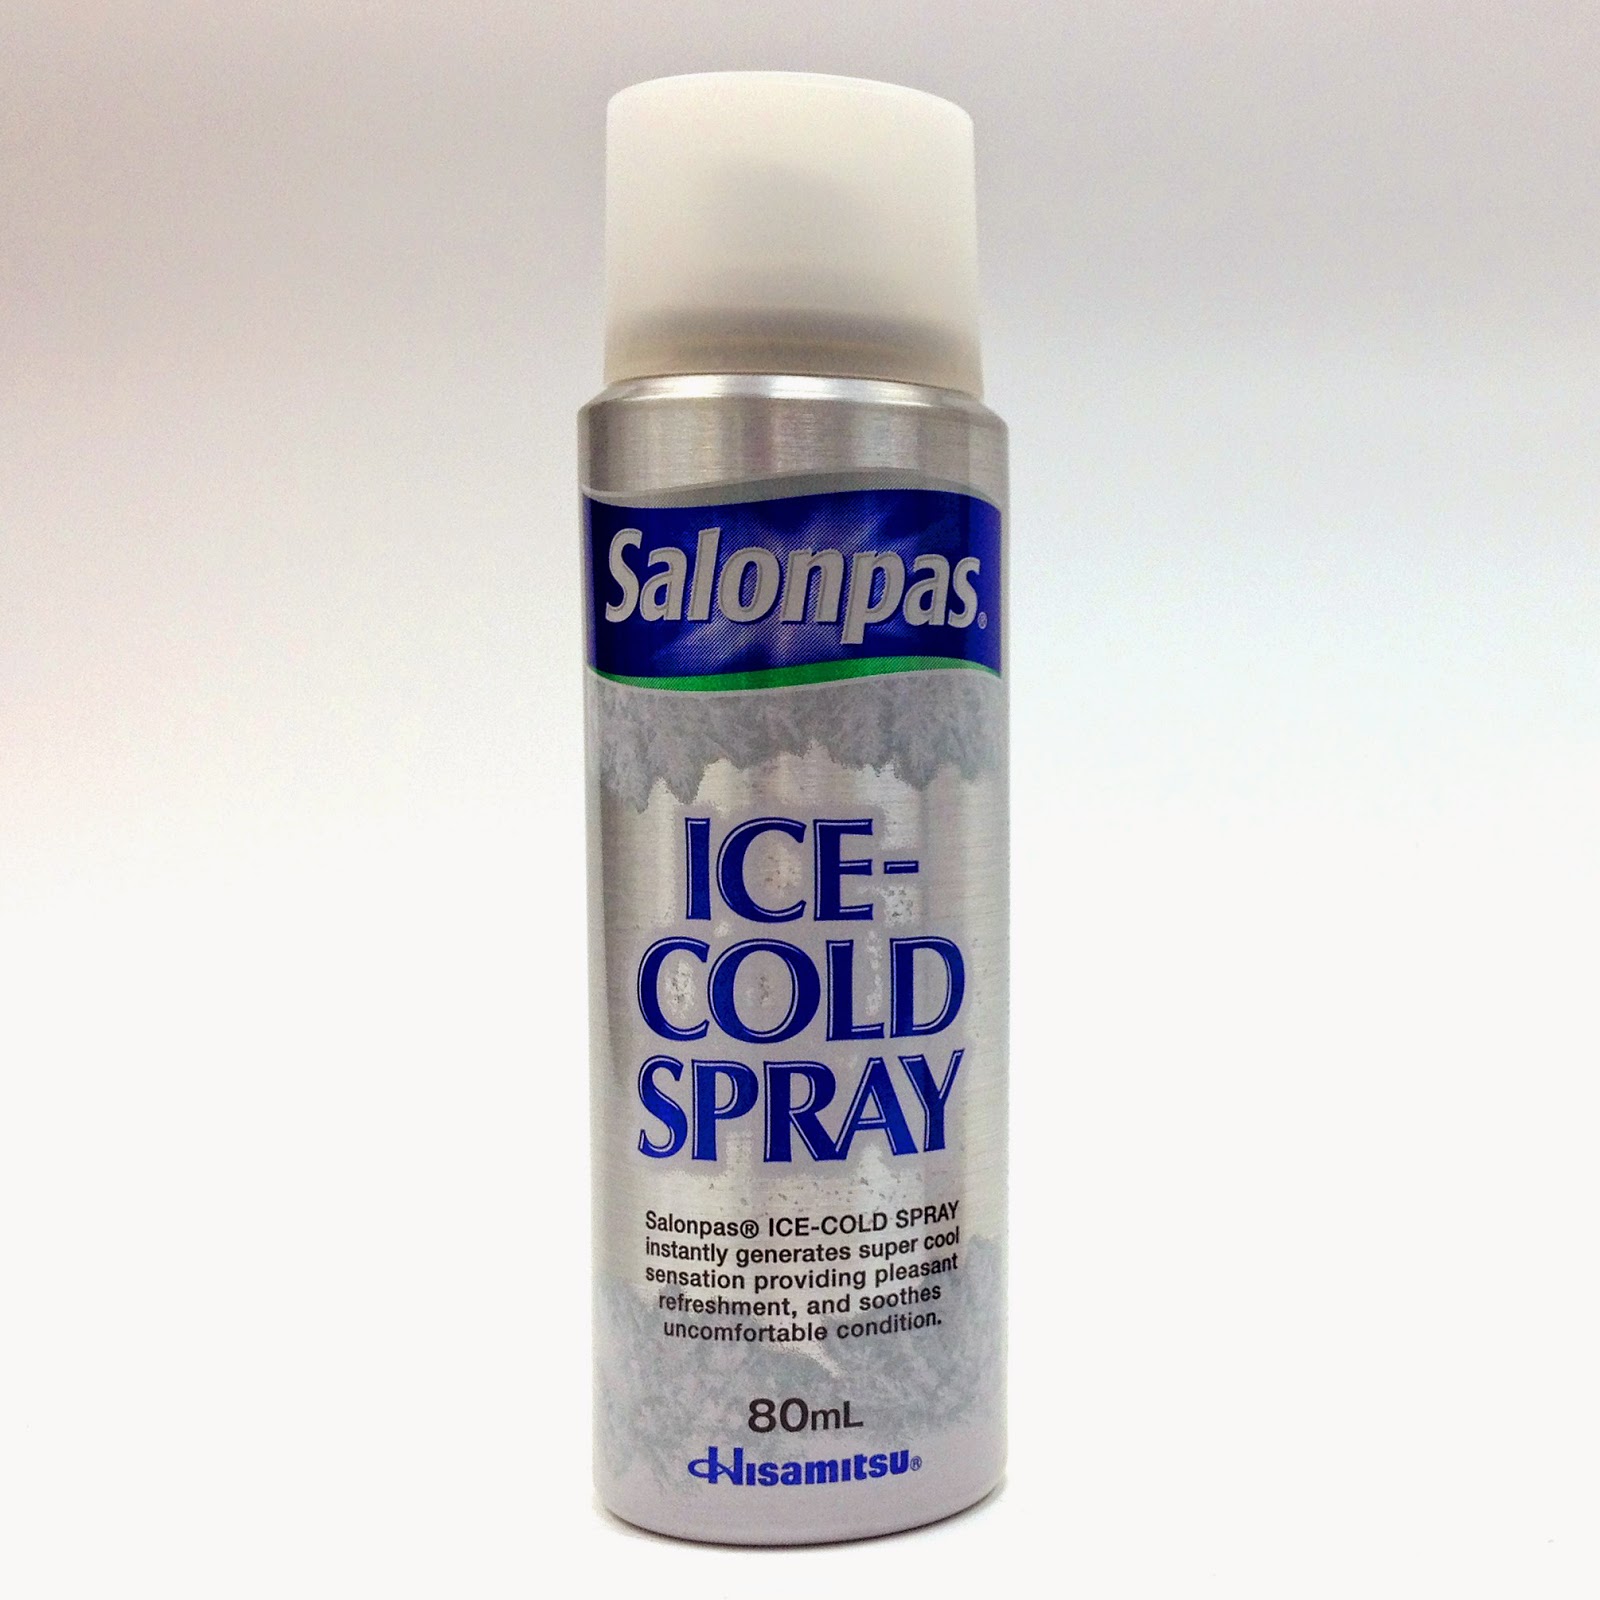 Mille Feuille Salonpas Ice Cold Spray